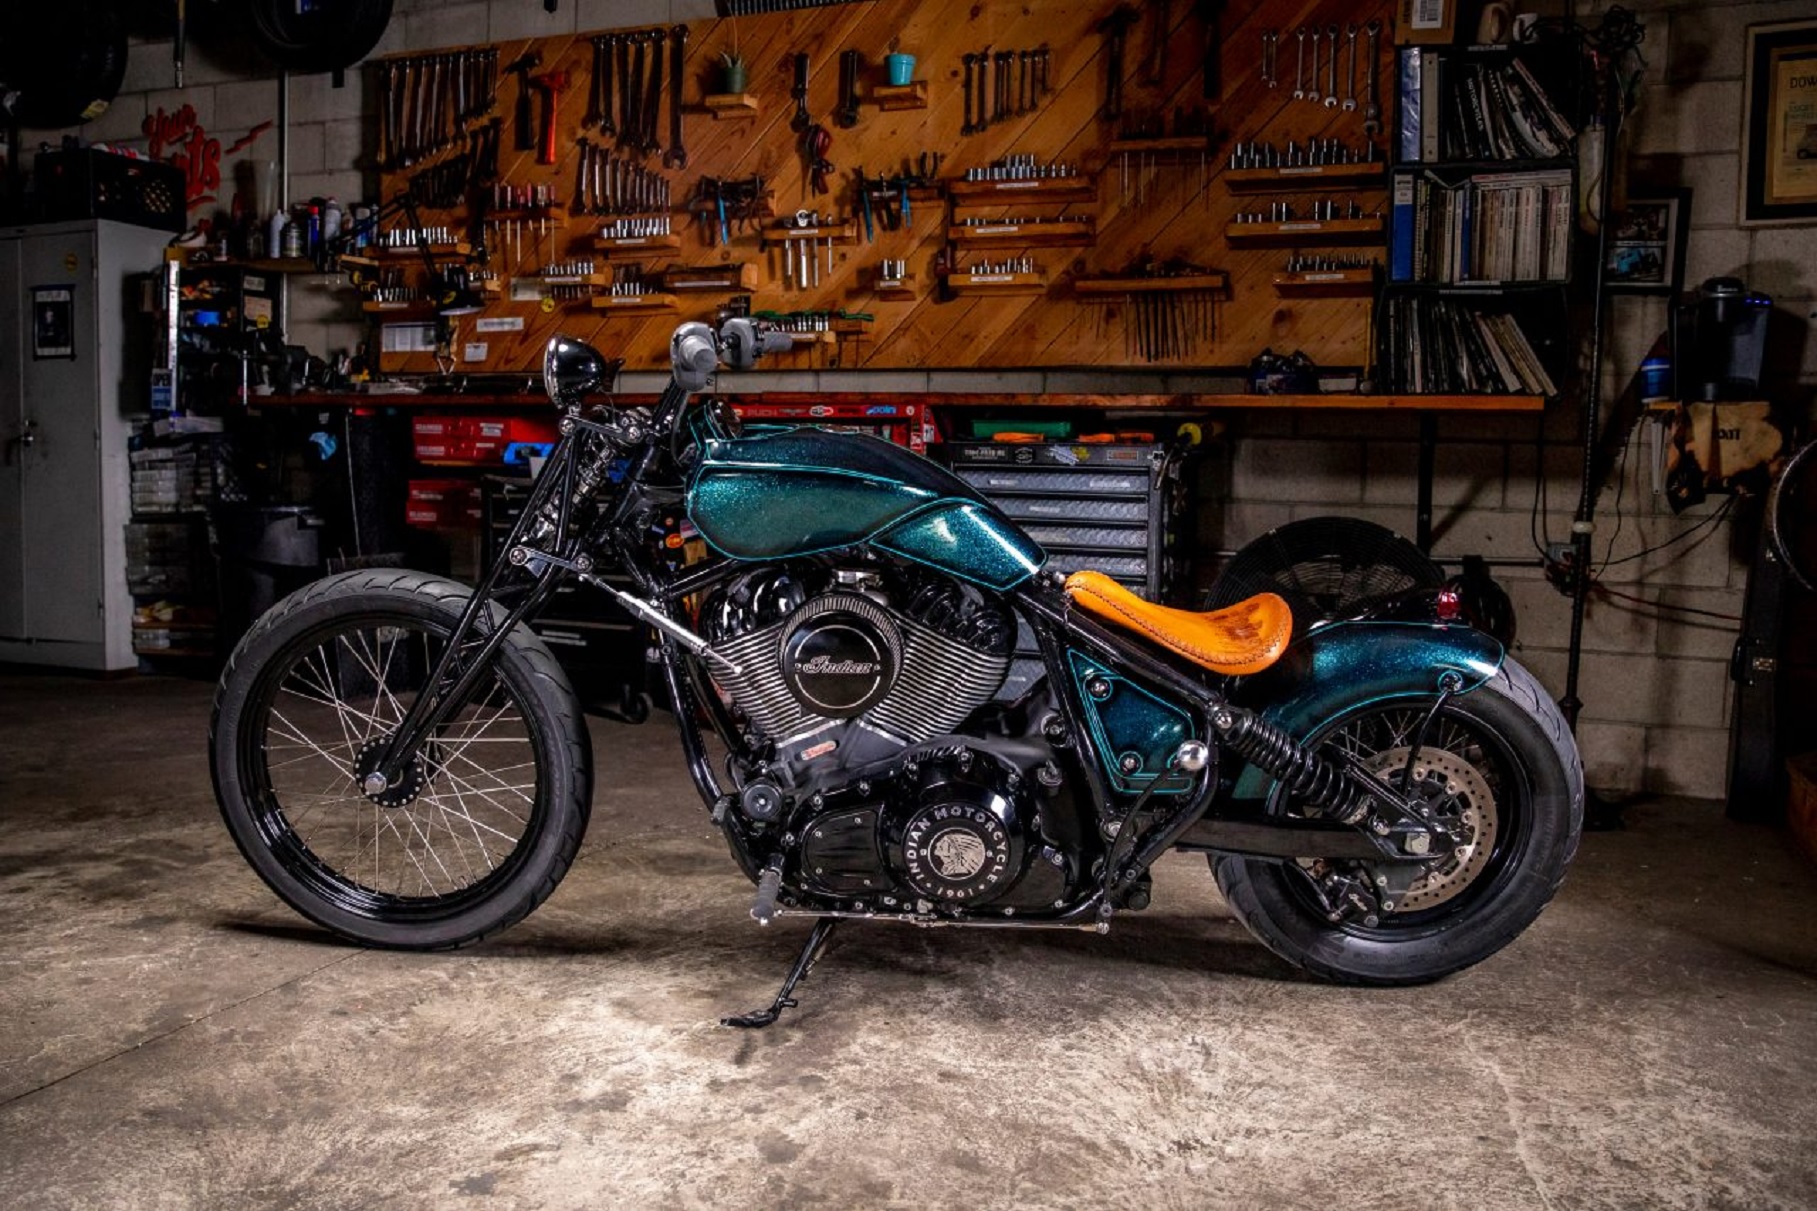 The side view of Paul Cox's and Keino Sasaki's metallic-green custom 2022 Indian Chief in a garage